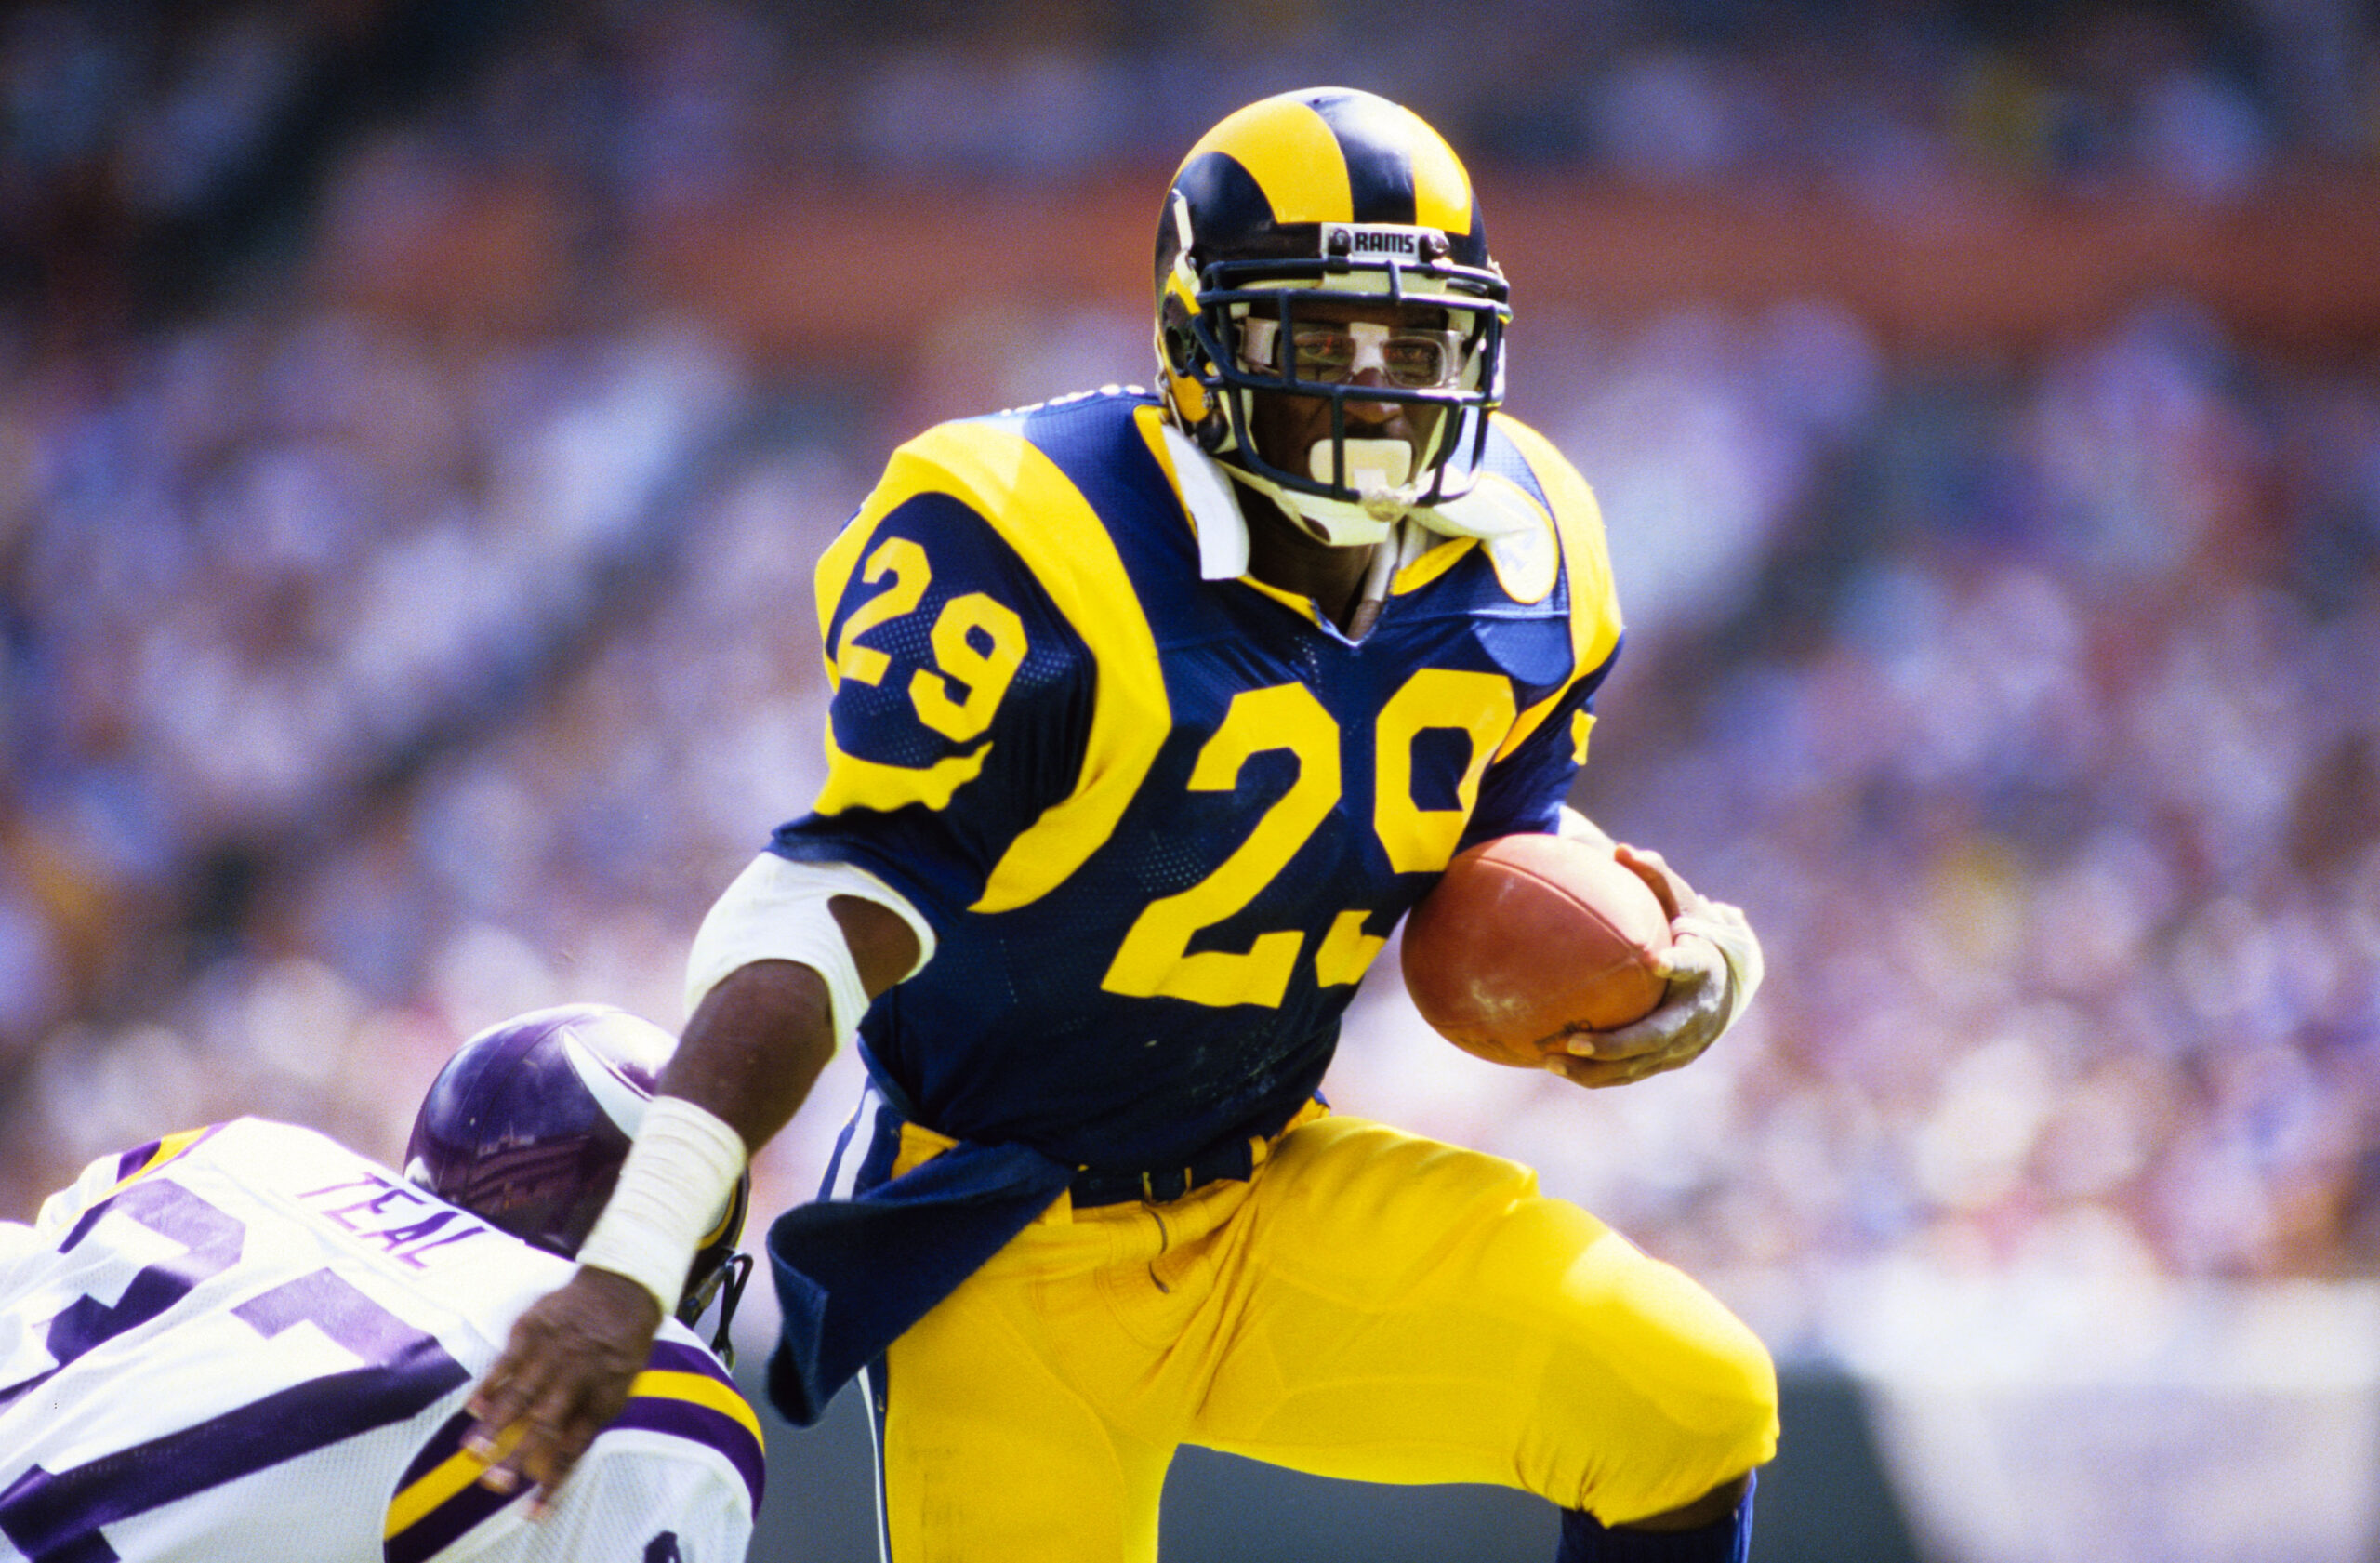 If the transfer portal existed, Eric Dickerson might have thought about playing for USC